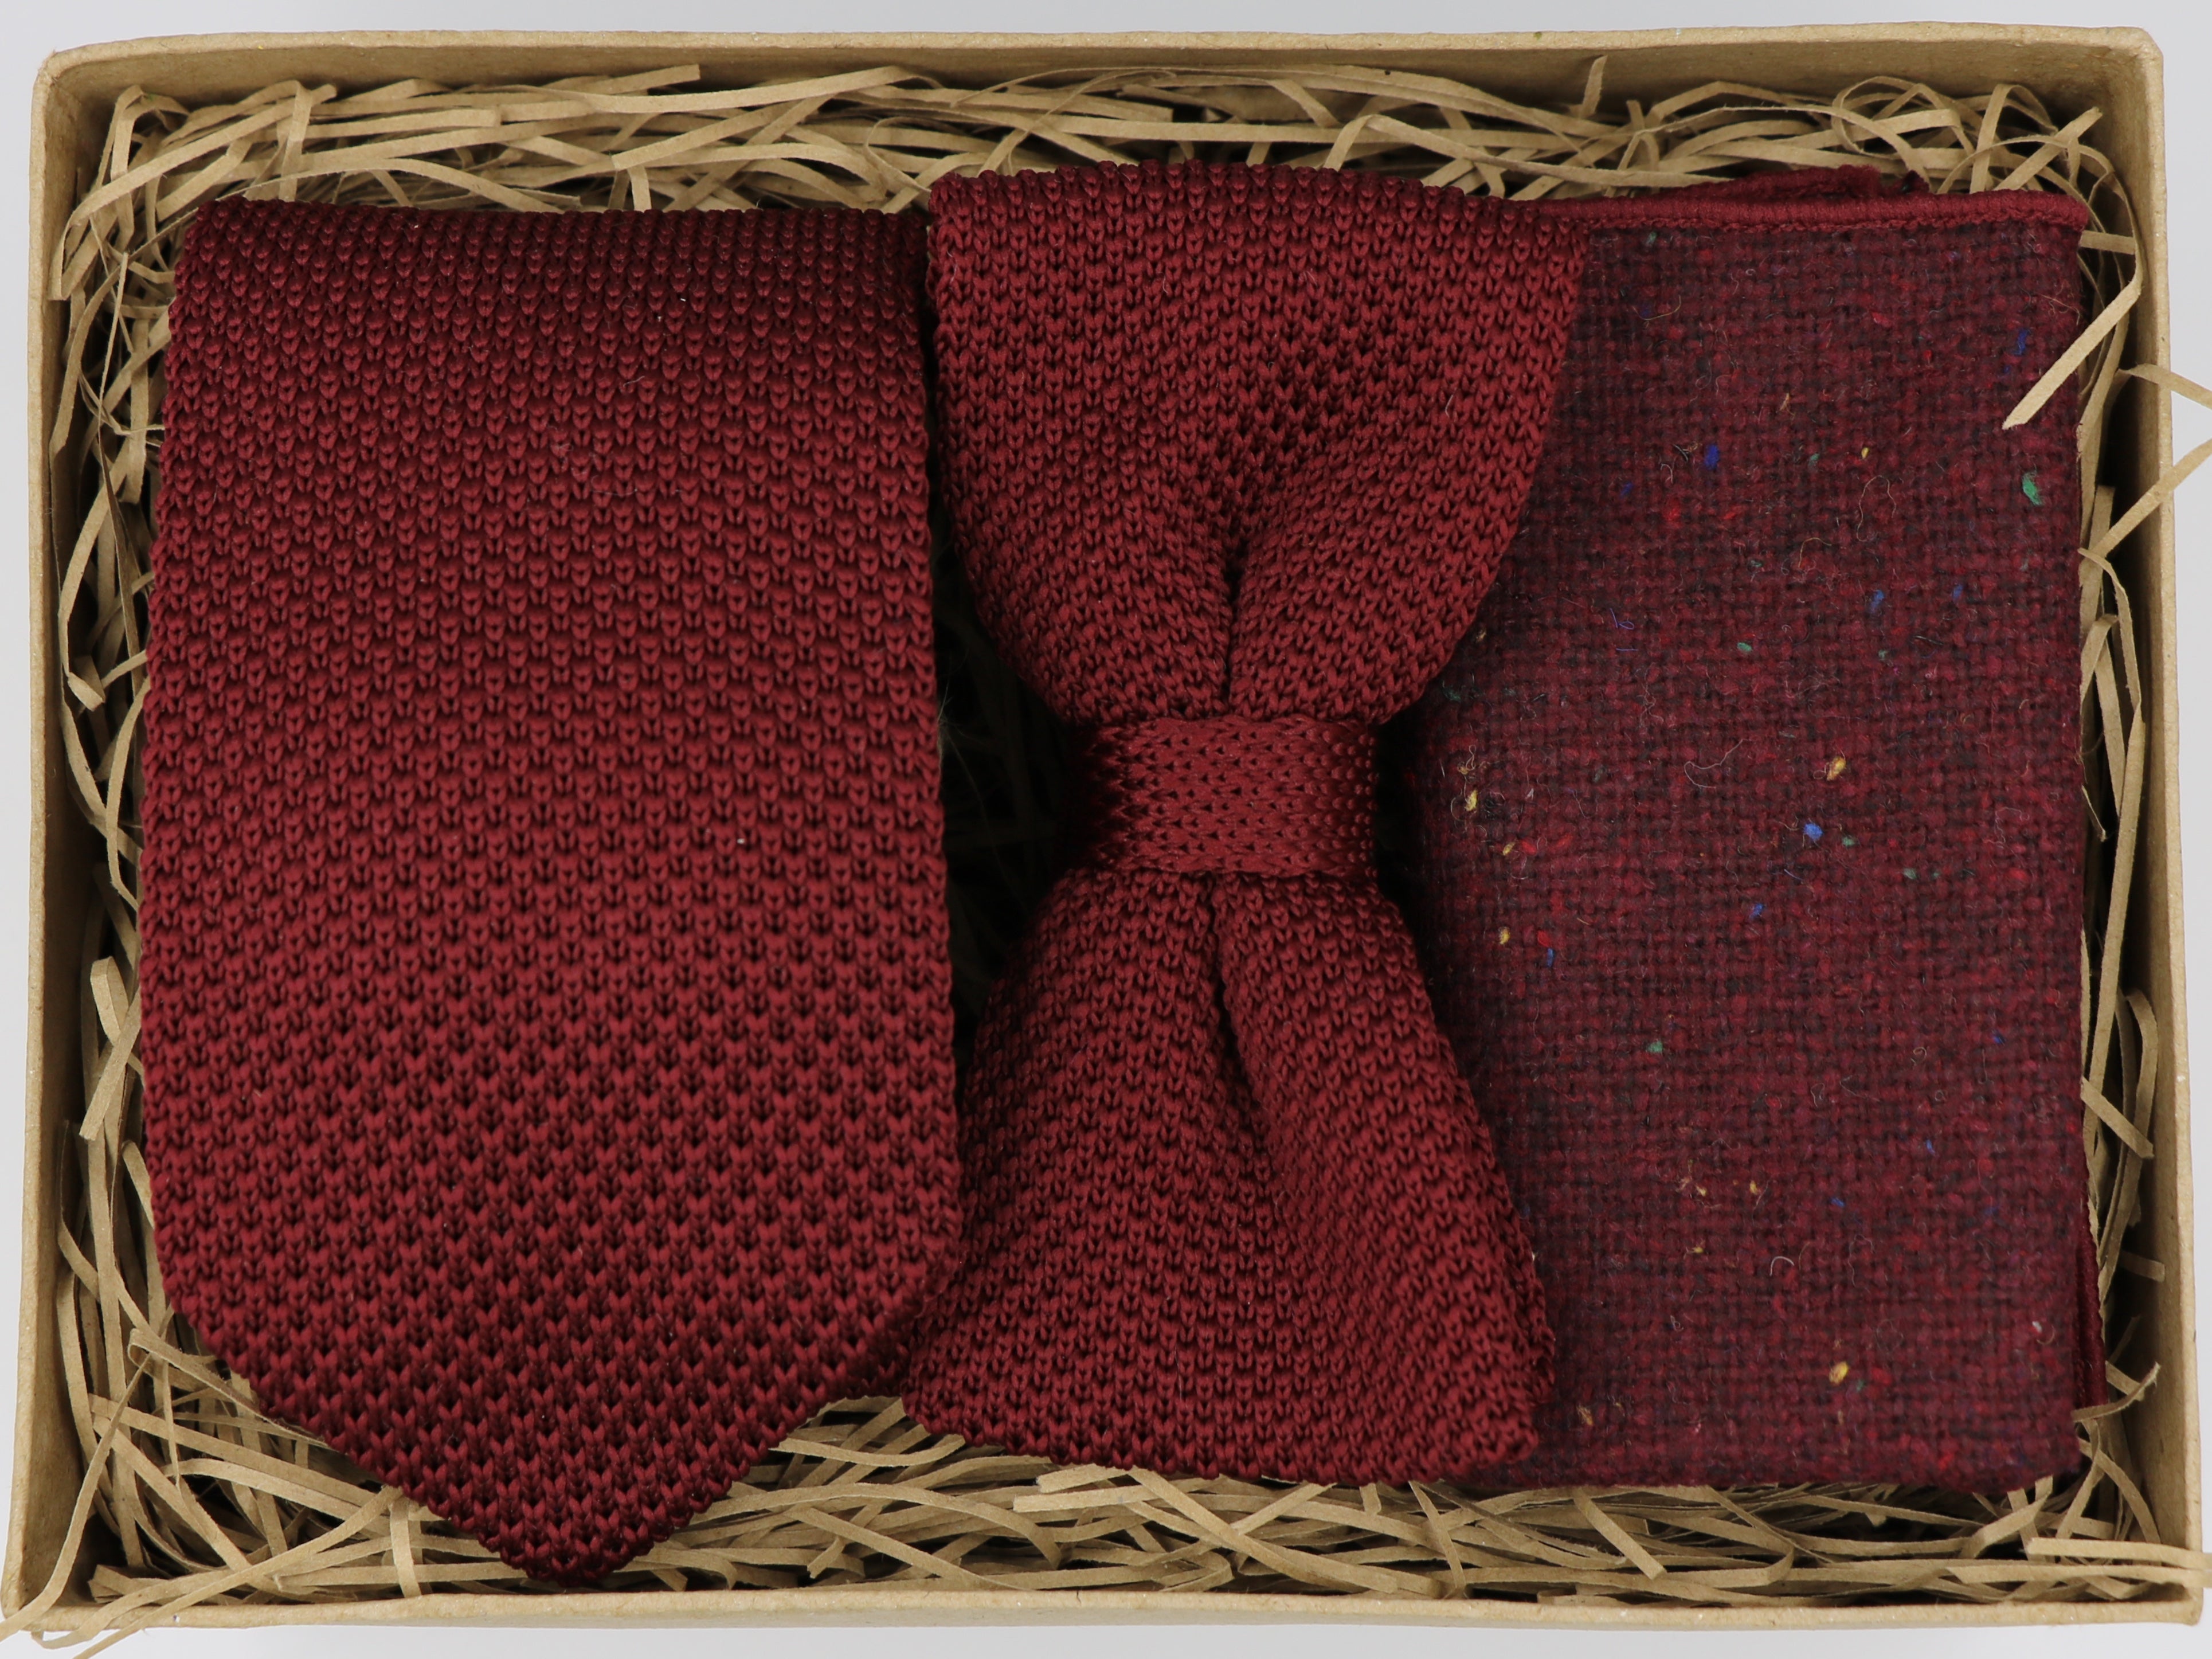 Dapper Duo: Bow Ties & Pocket Squares - High Cotton